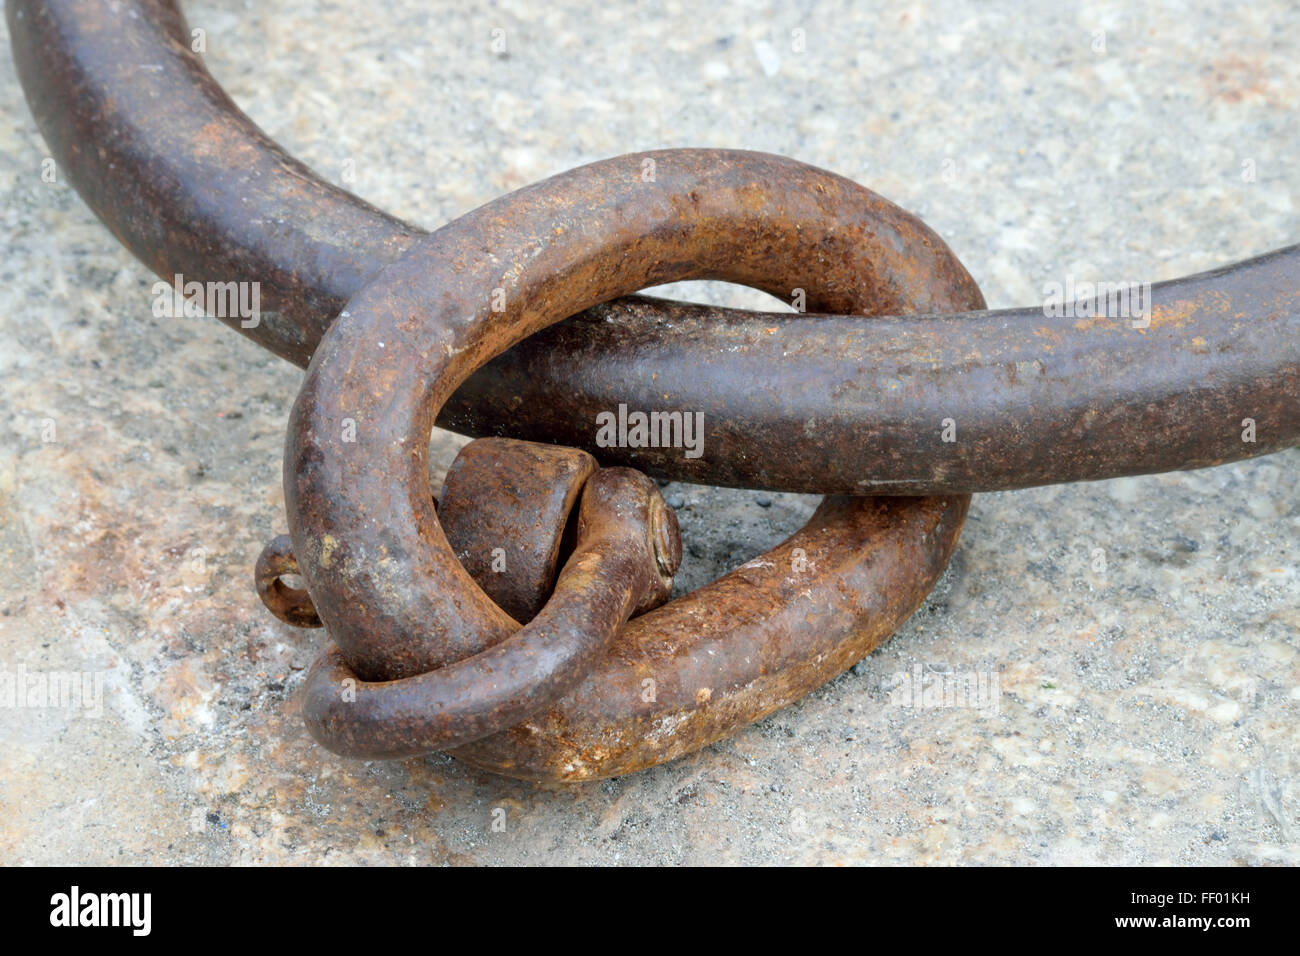 Rusted Iron Chain In Port Stock Photos & Rusted Iron Chain In Port